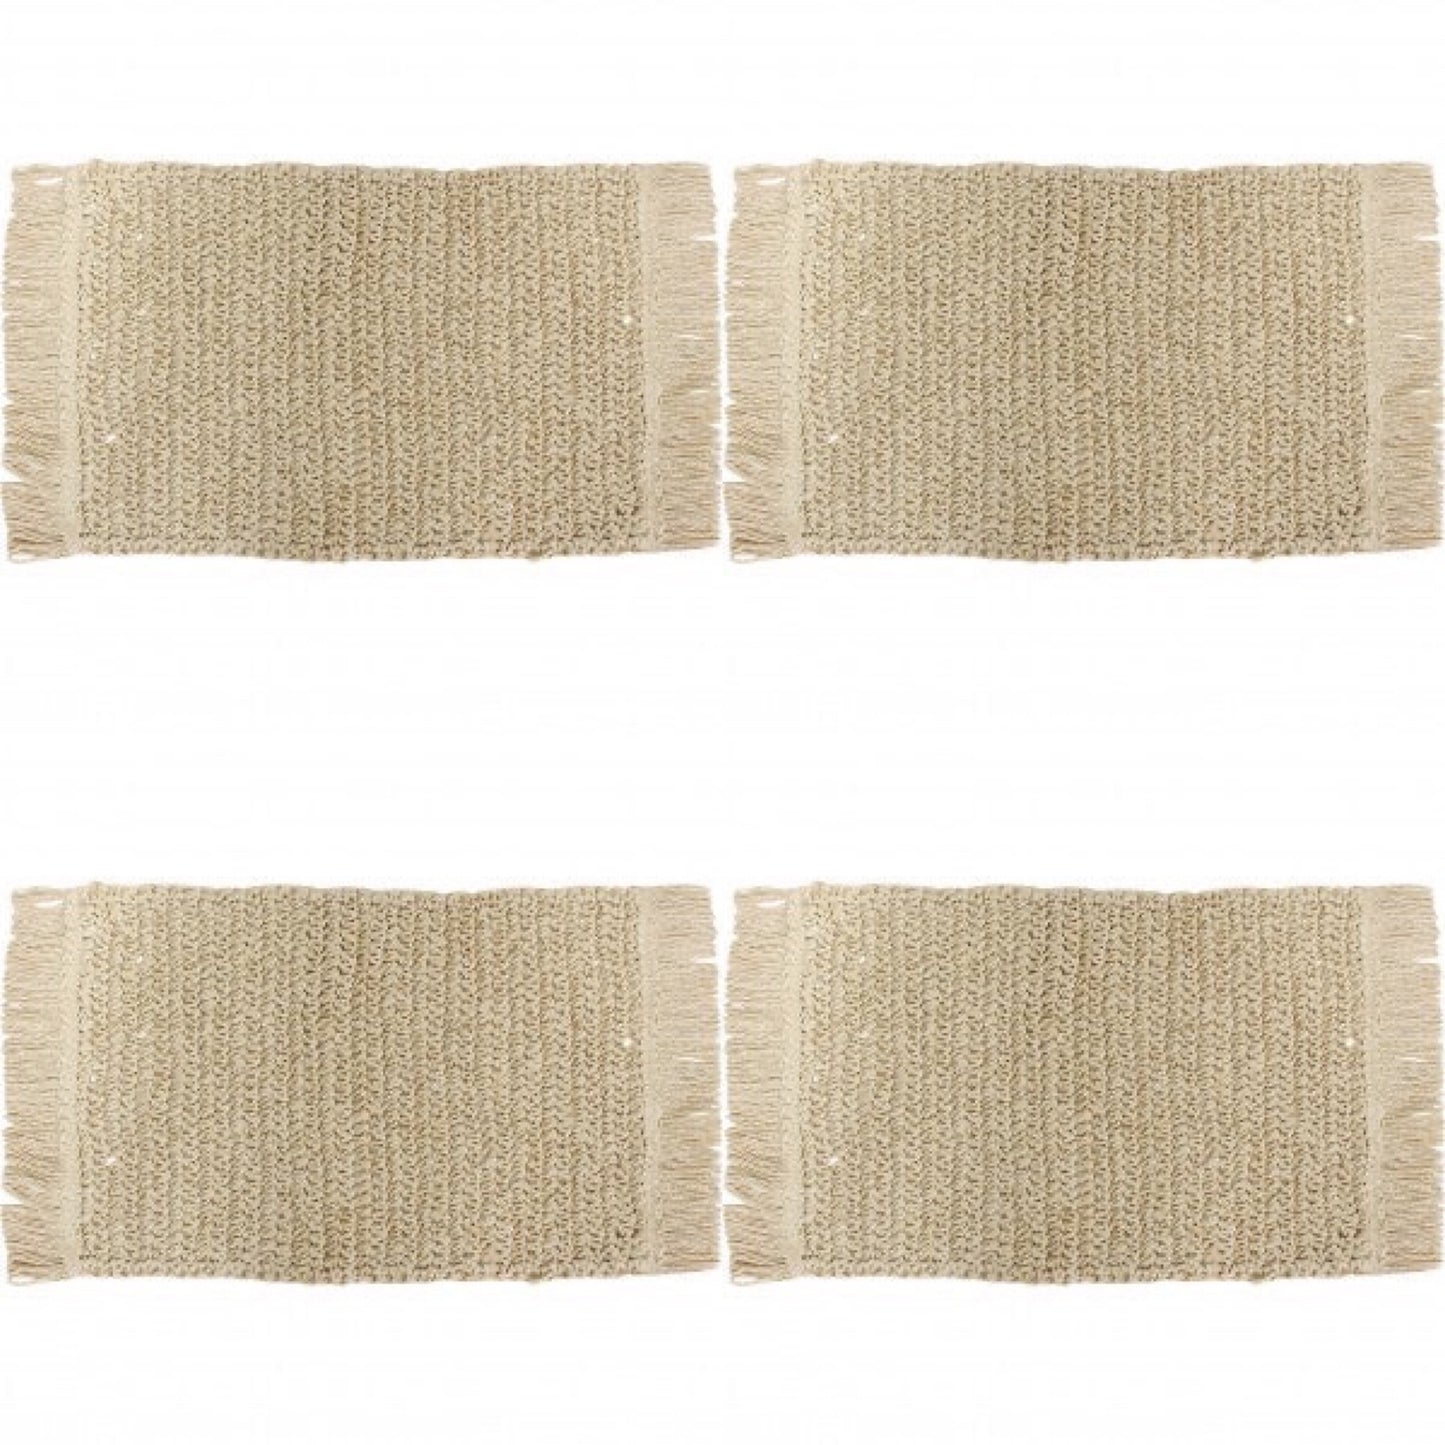 Placemat Set of 4 Natural Square - The Renmy Store Homewares & Gifts 